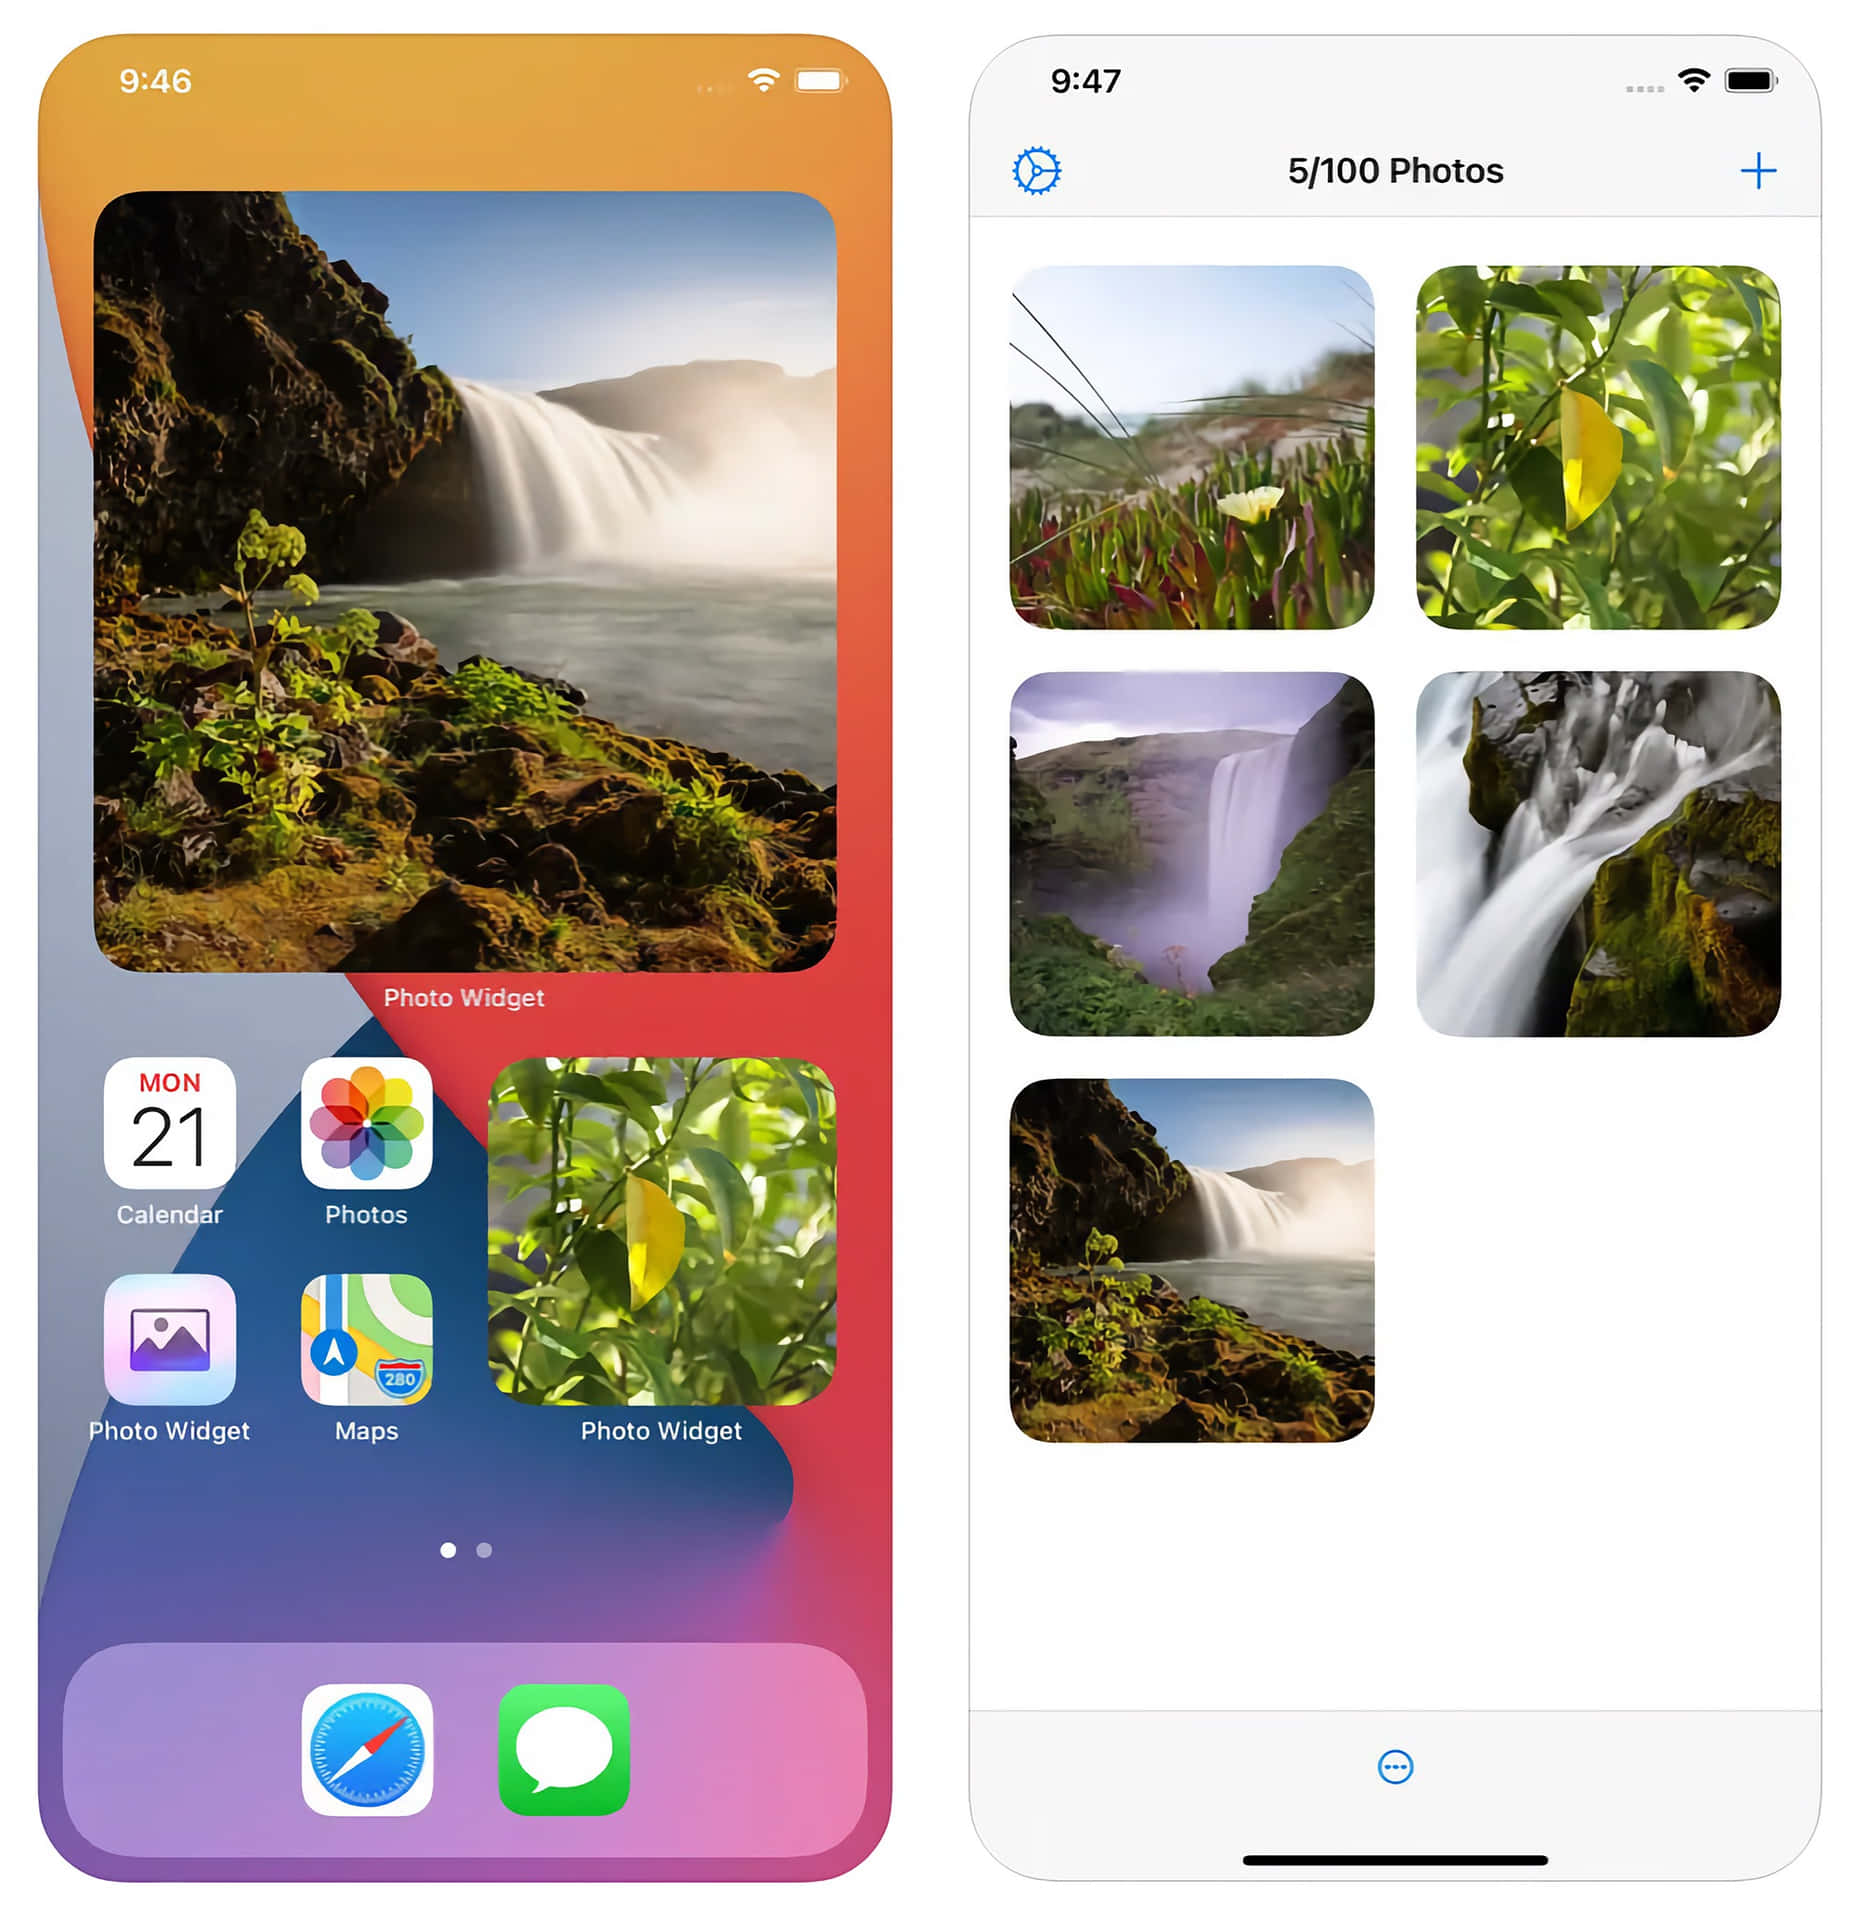 a picture of a waterfall and a waterfall on an iphone